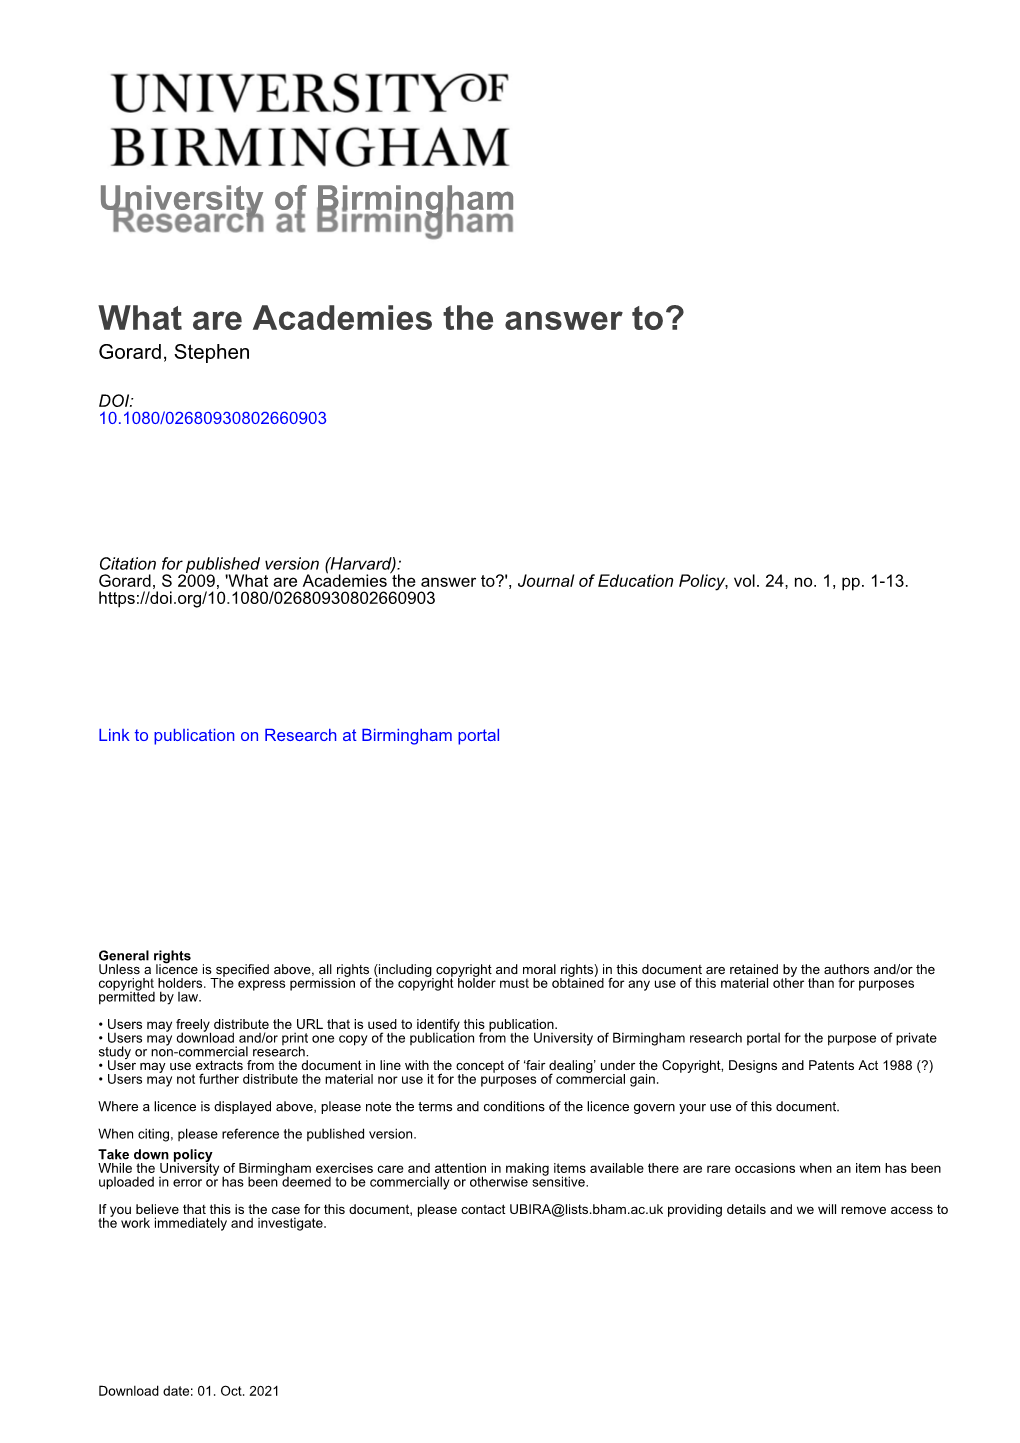 What Are Academies the Answer To? Gorard, Stephen